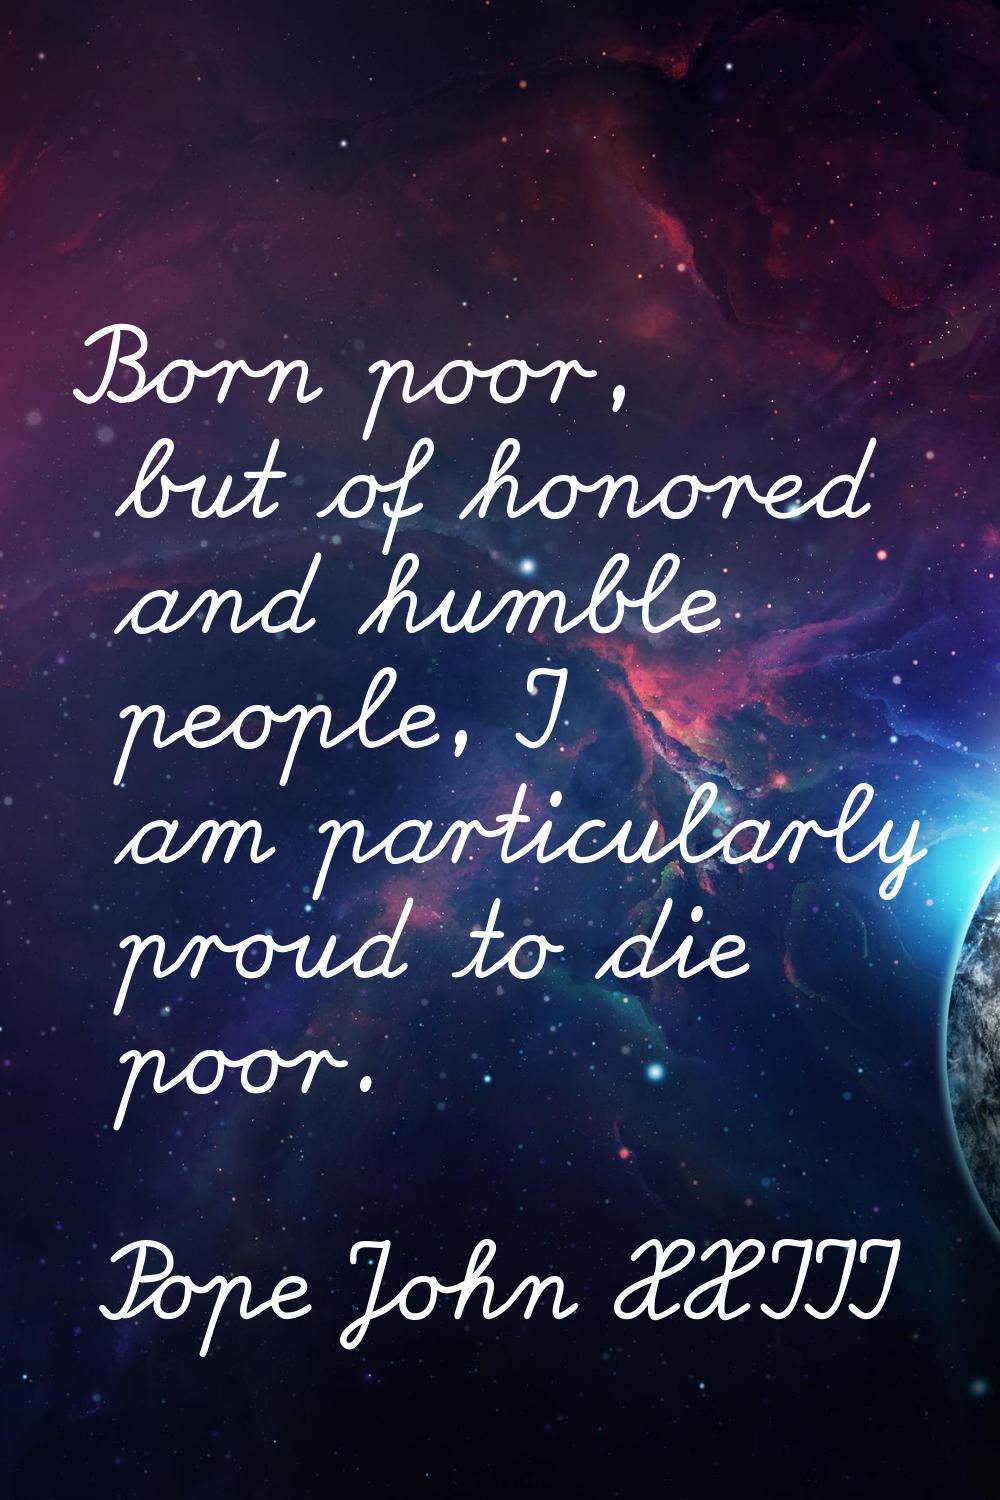 Born poor, but of honored and humble people, I am particularly proud to die poor.